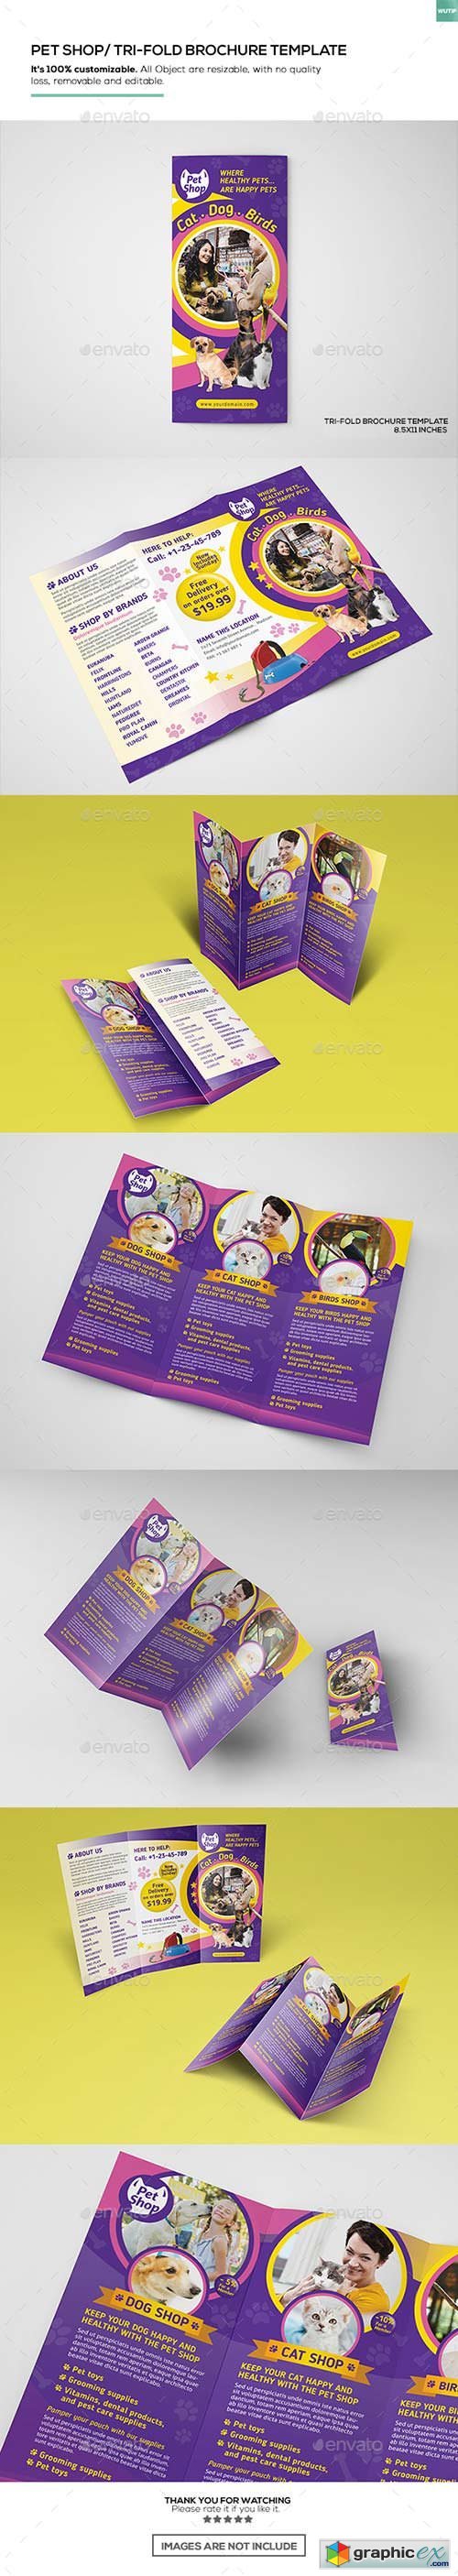 Pet Store/ Trifold Brochure Template